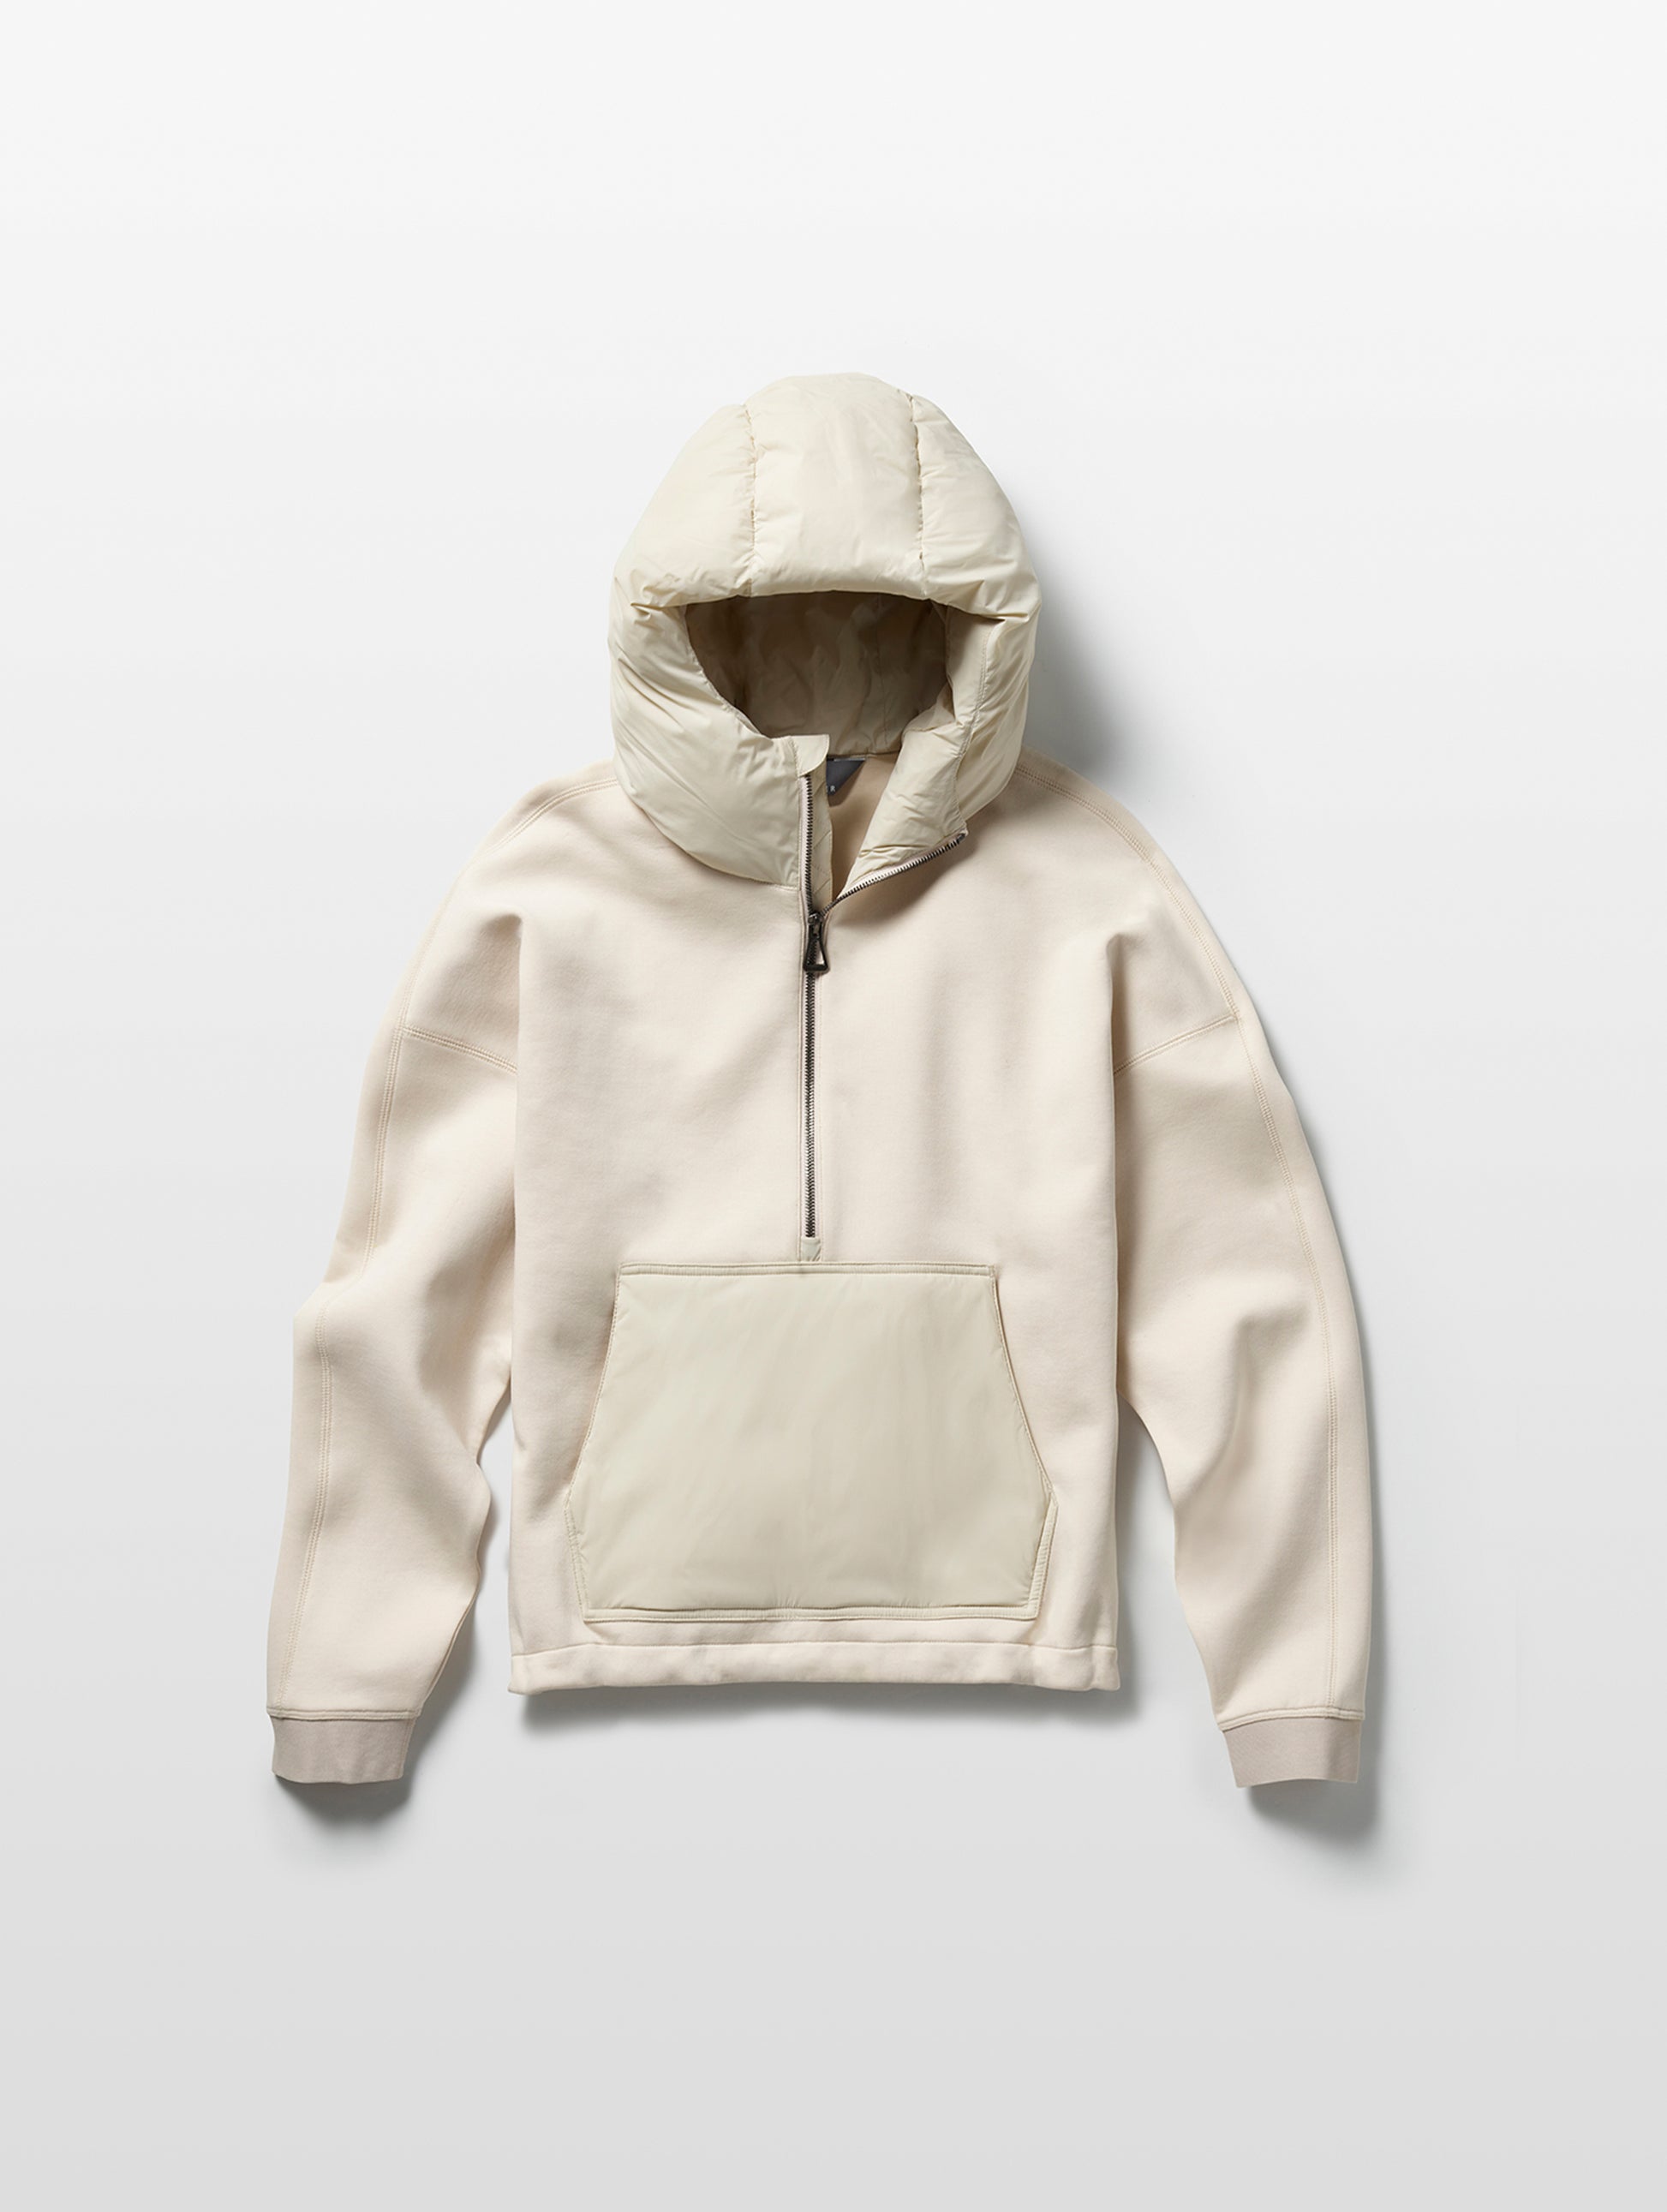 Beige Align Hooded Anorak from AETHER Apparel.